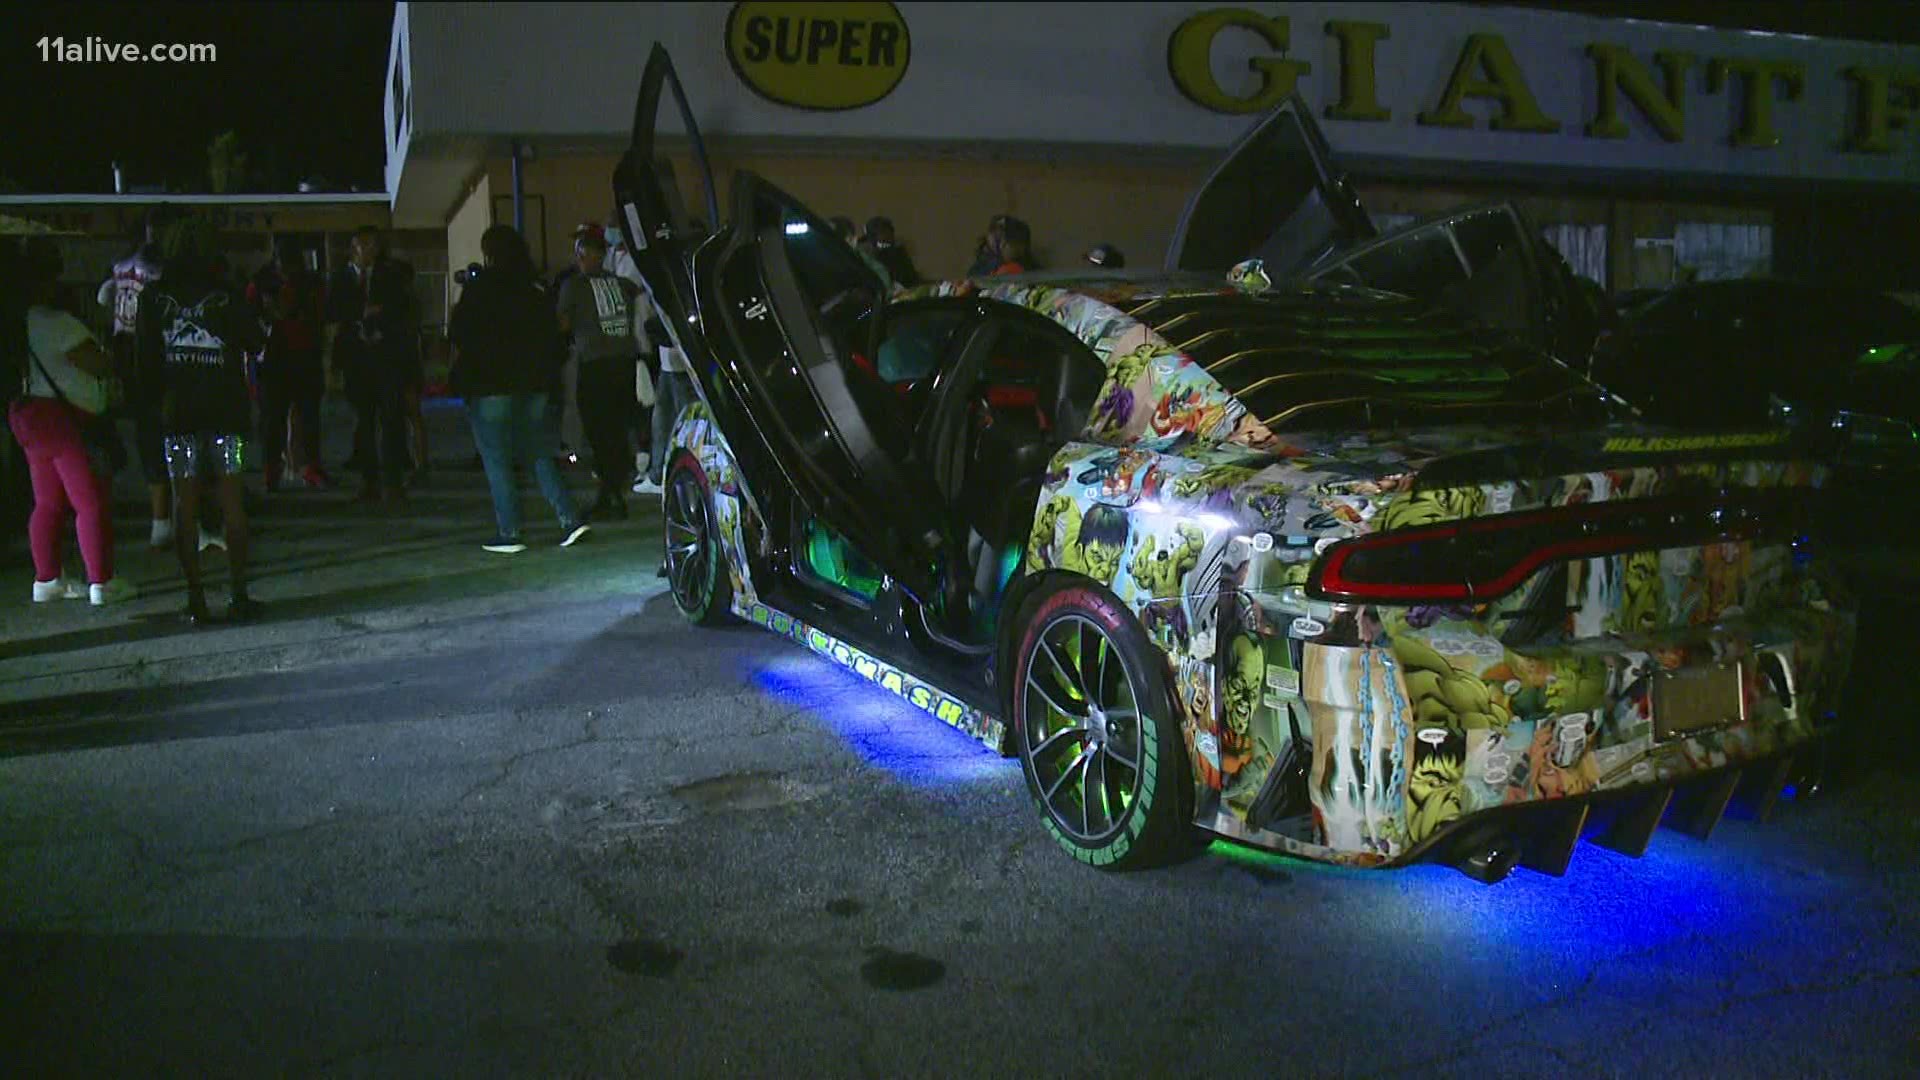 Police say it's dangerous, while car enthusiasts call it a passion.